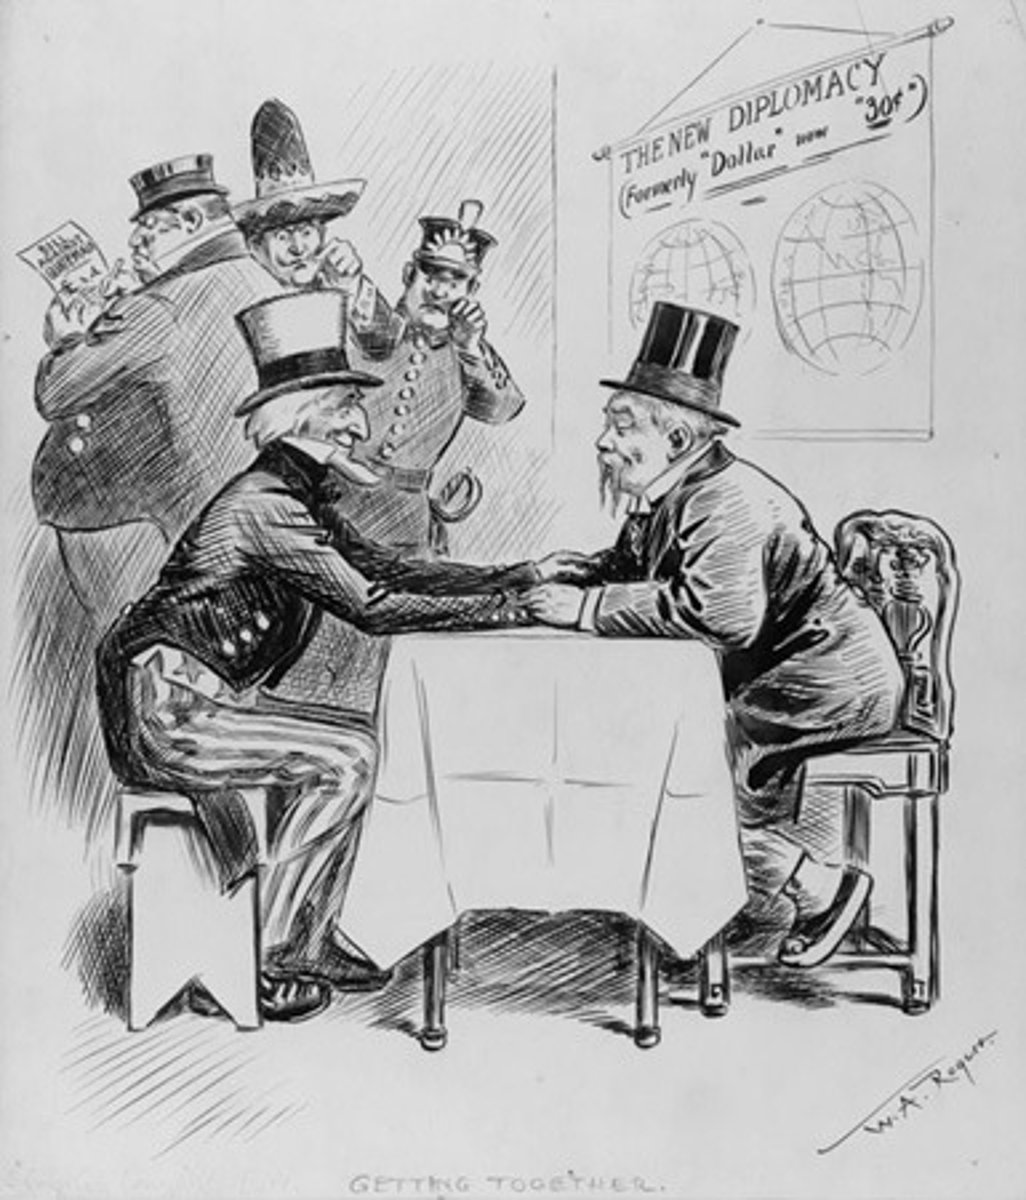 <p>Foreign policy created under President Taft that had the U.S. exchanging financial support ($) for the right to "help" countries make decisions about trade and other commercial ventures. Basically it was exchanging money for political influence in Latin America and the Caribbean.</p>